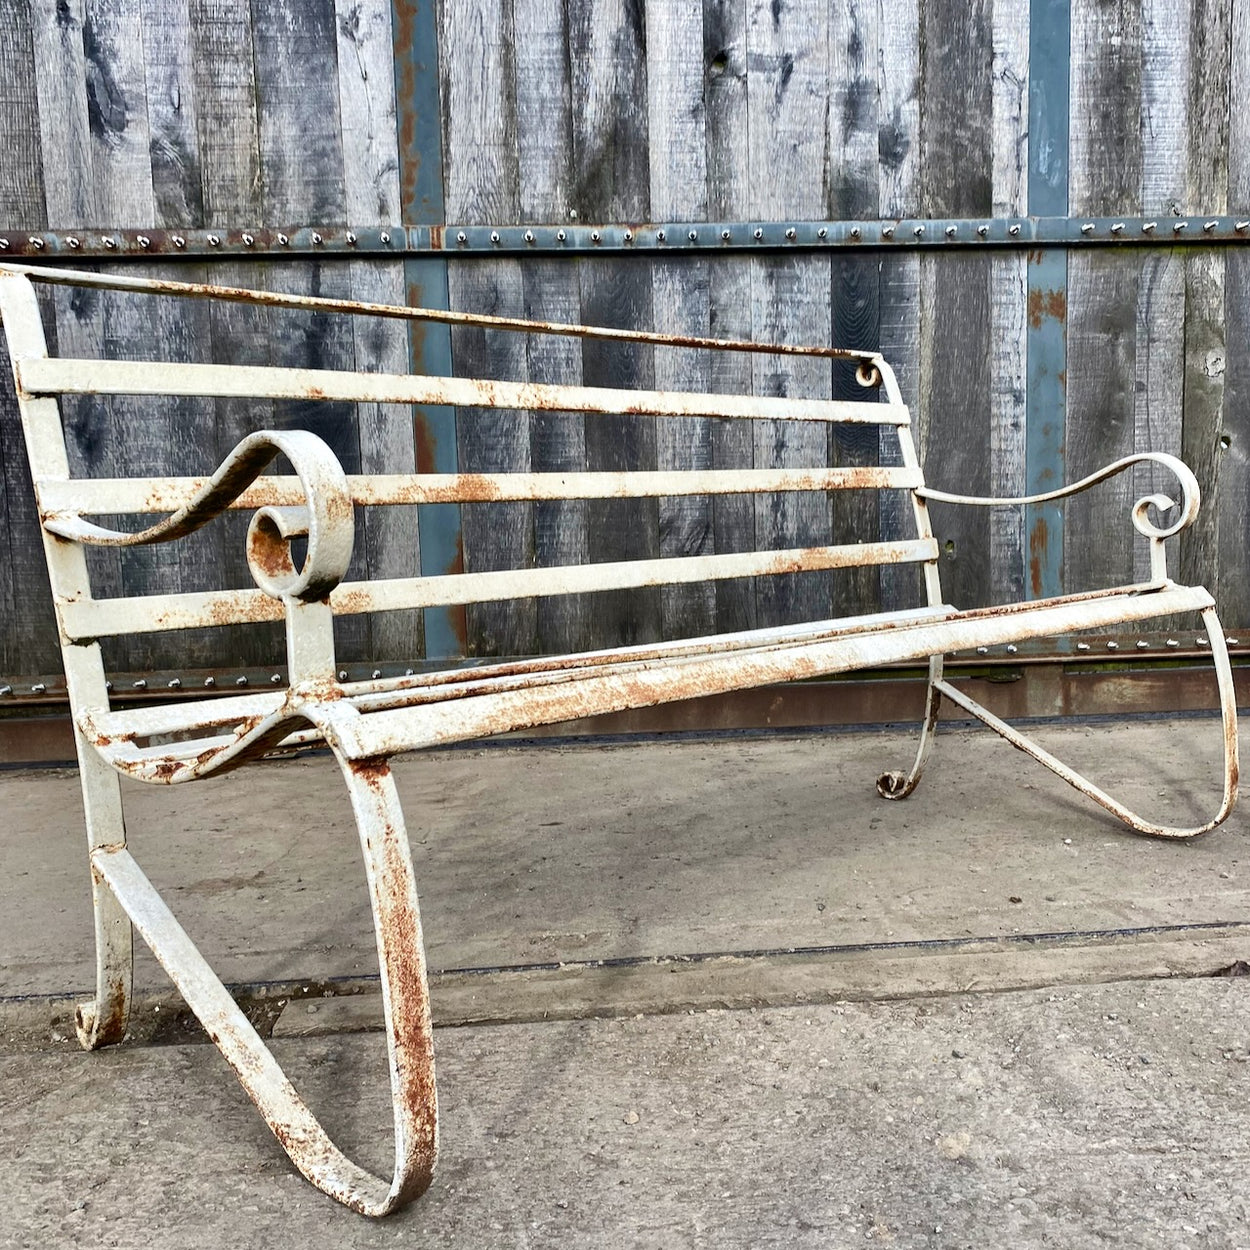 Regency Style Benches